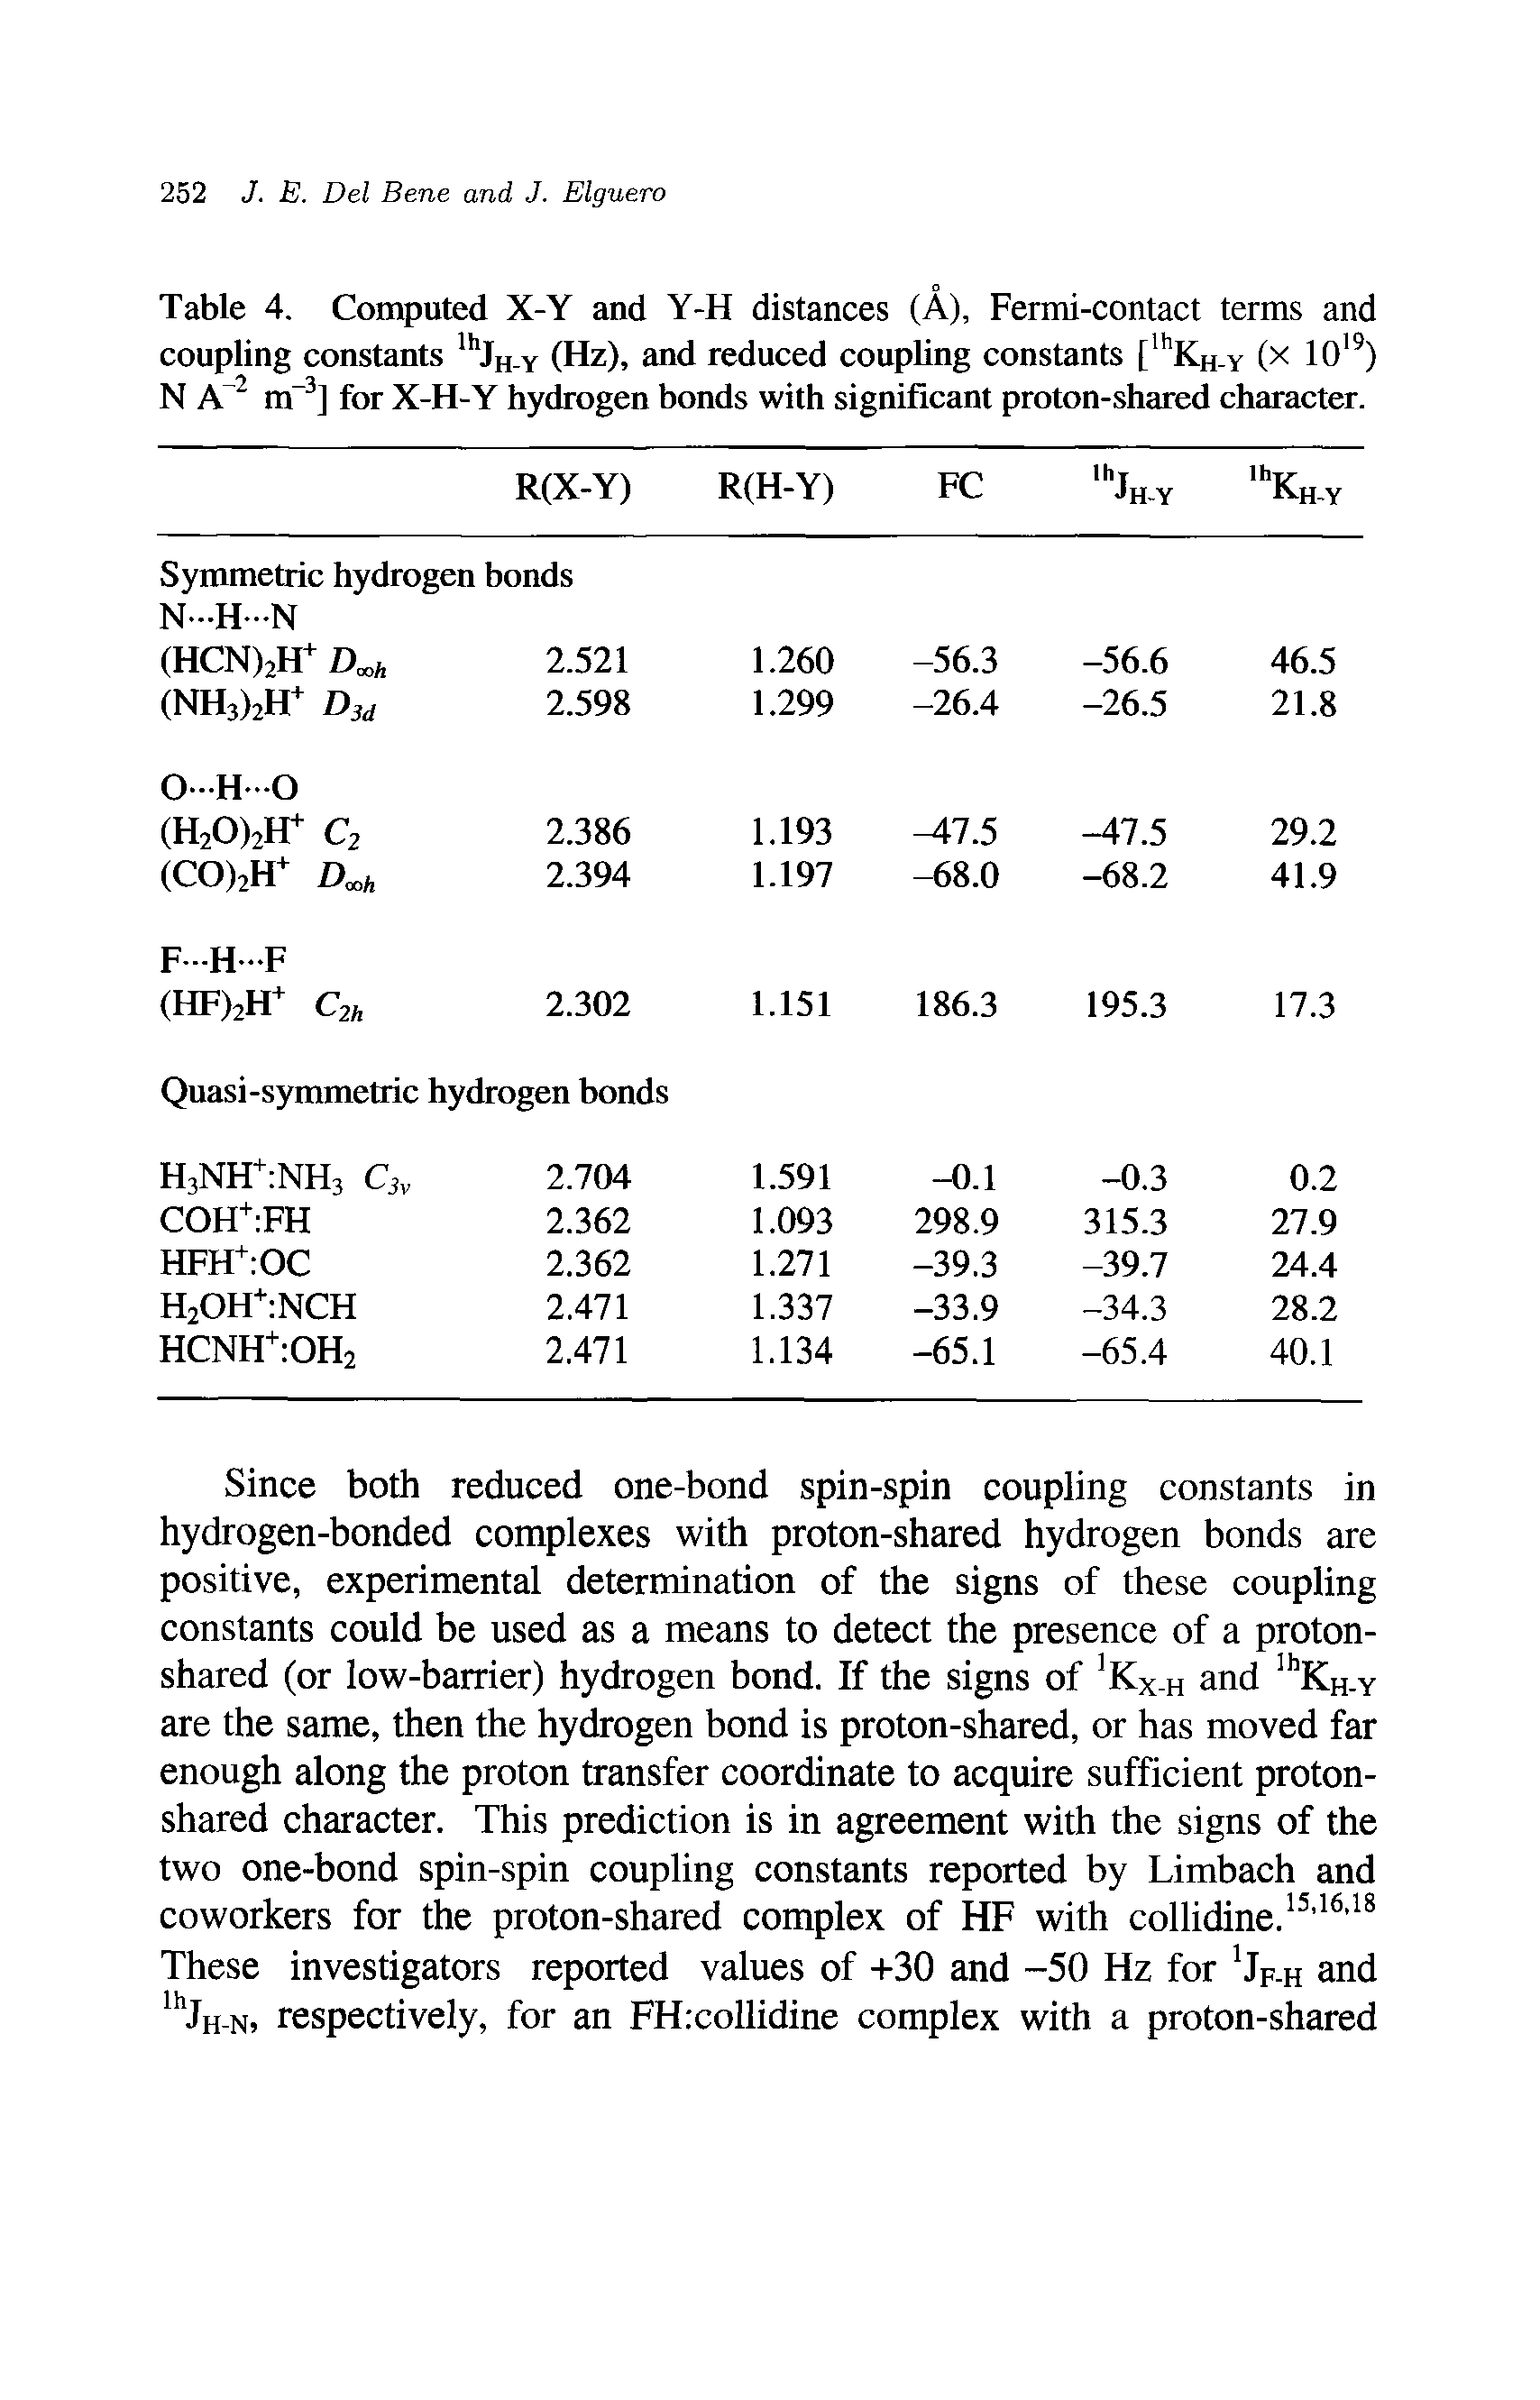 Table 4. Computed X-Y and Y-H distances (A), Fermi-contact terms and coupling constants lhJH-Y (Hz), and reduced coupling constants [lhKH-Y (x 1019) N A 2 m-3] for X-H-Y hydrogen bonds with significant proton-shared character.